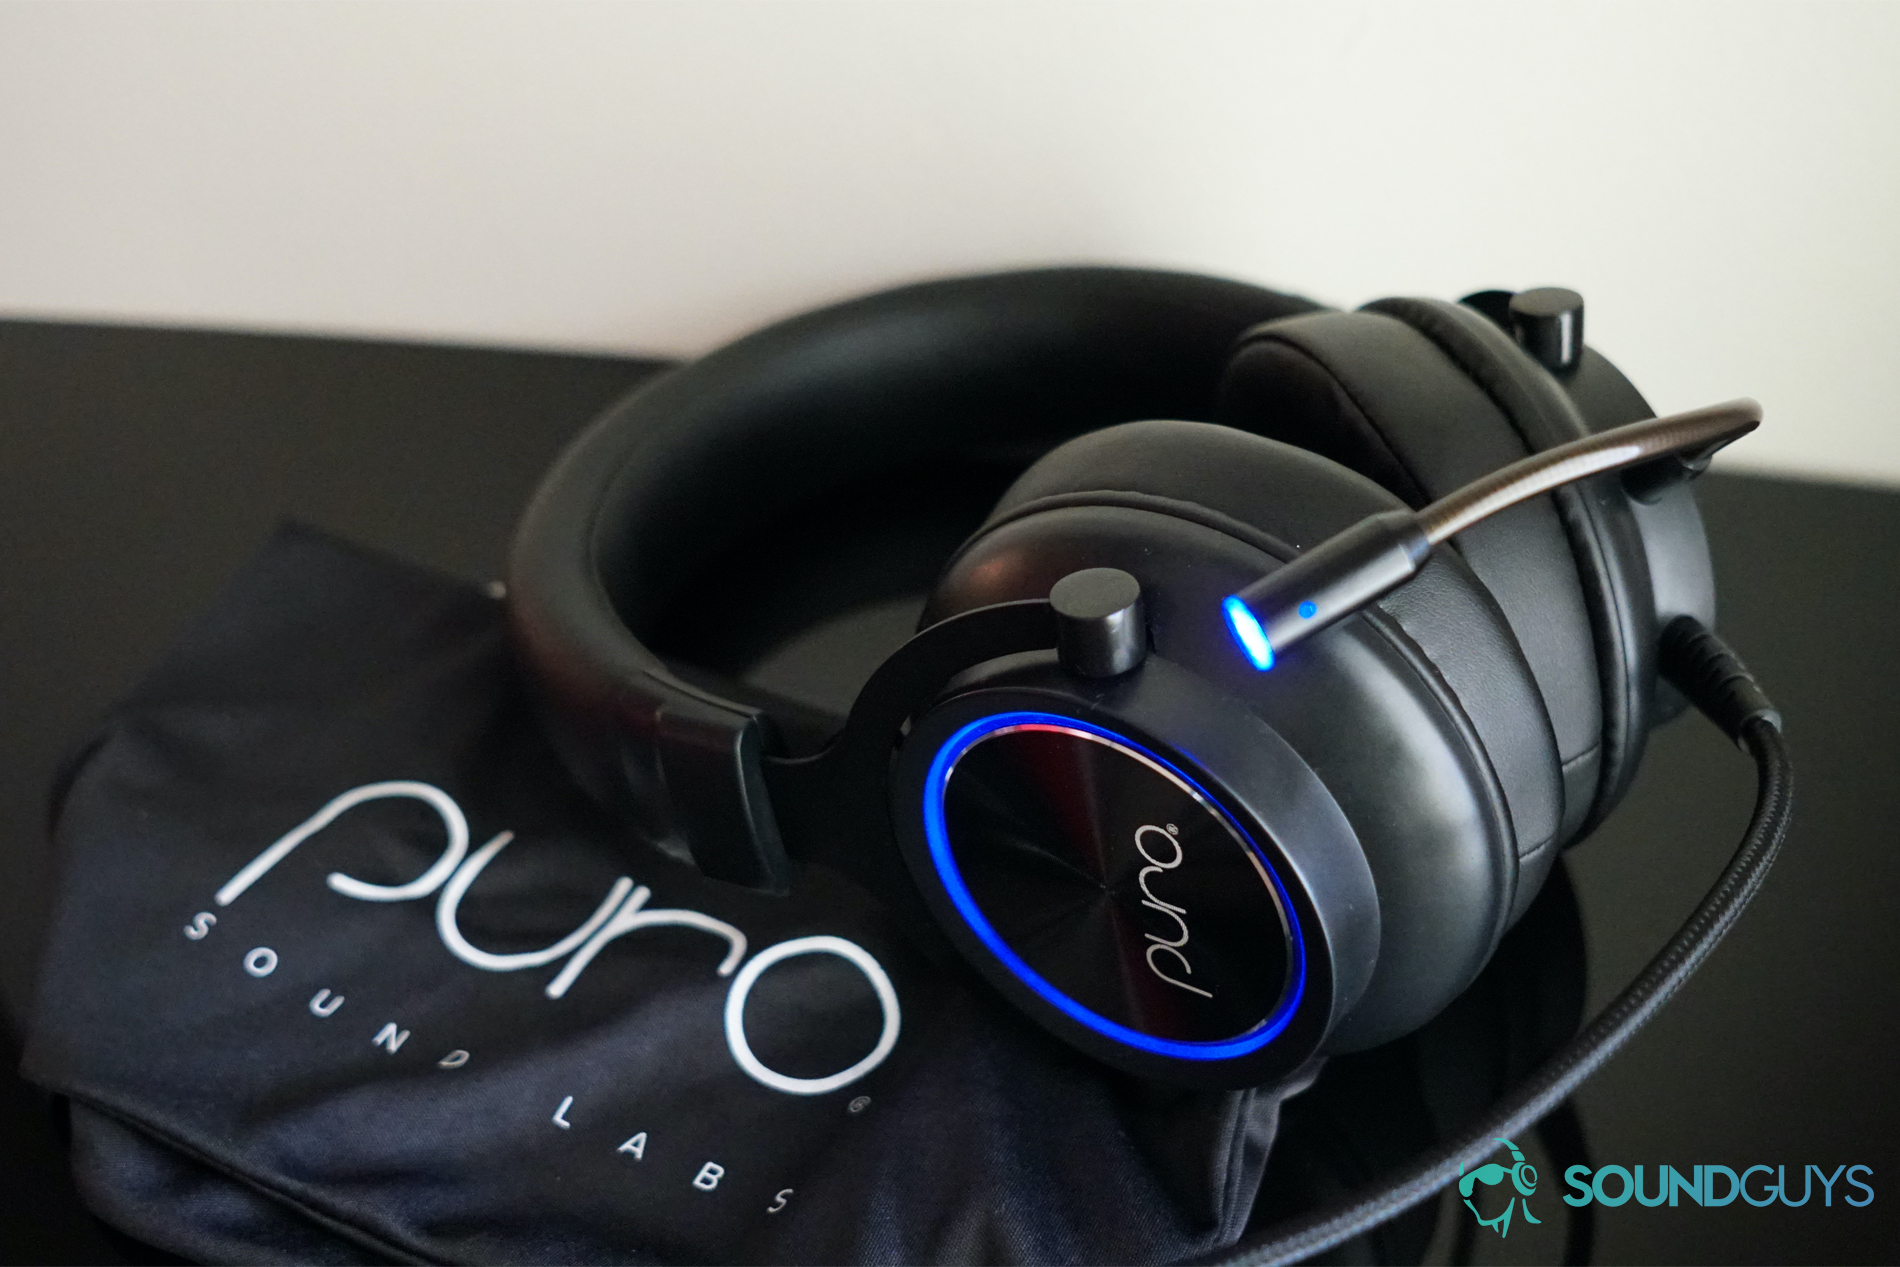 The Puro Sound Labs PuroGamer headset sits on top of its carry bag on a black surface